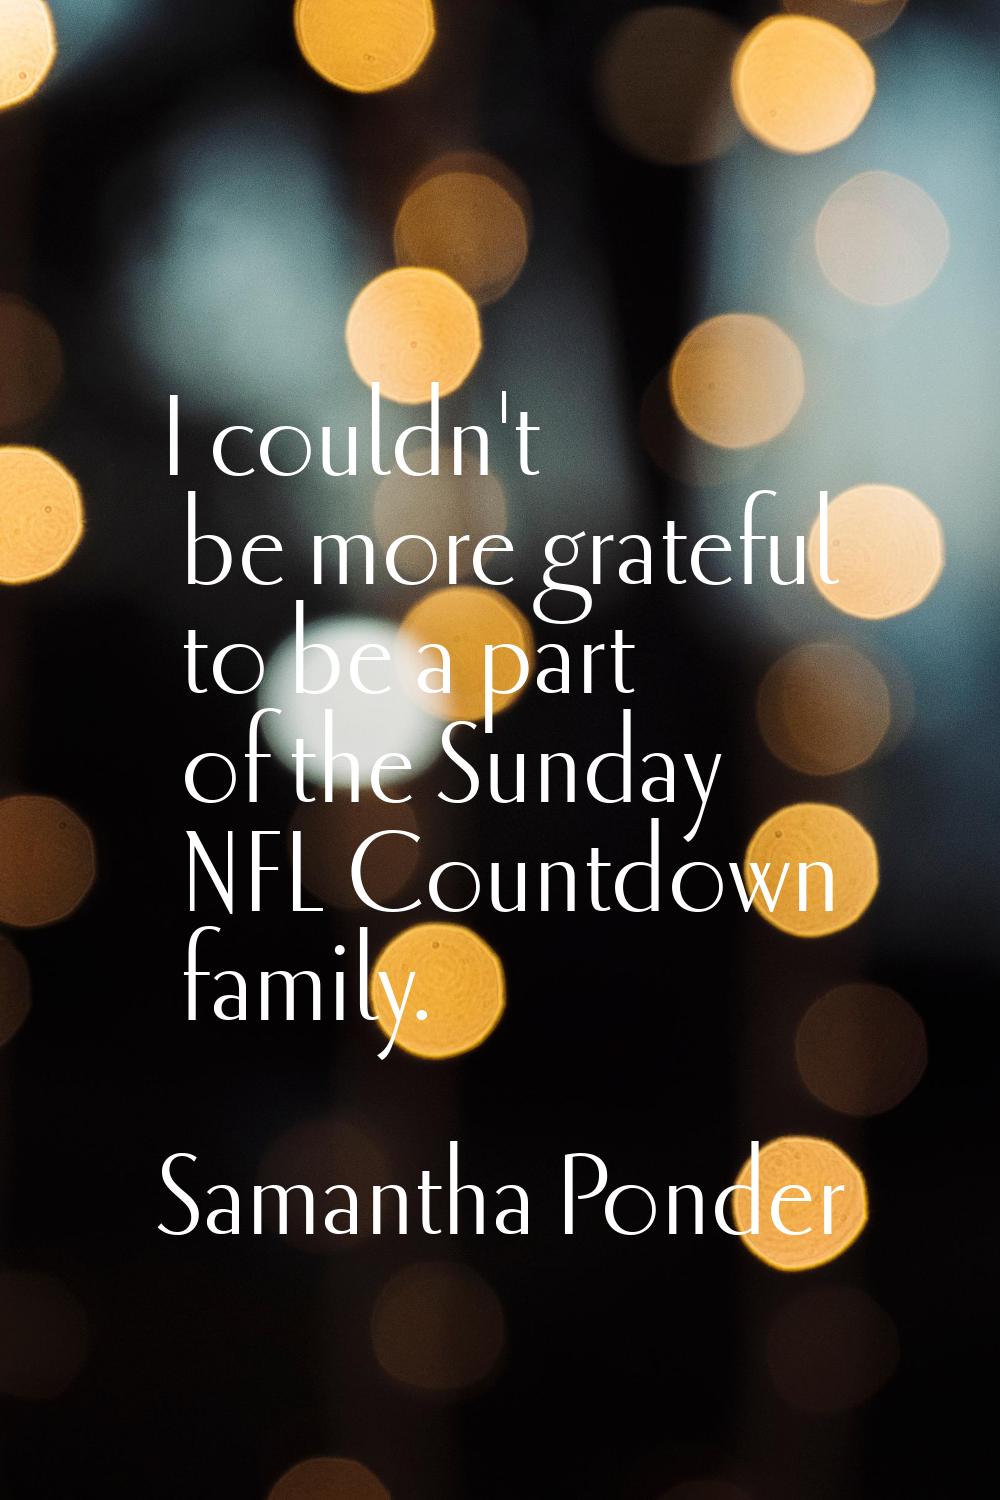 I couldn't be more grateful to be a part of the Sunday NFL Countdown family.